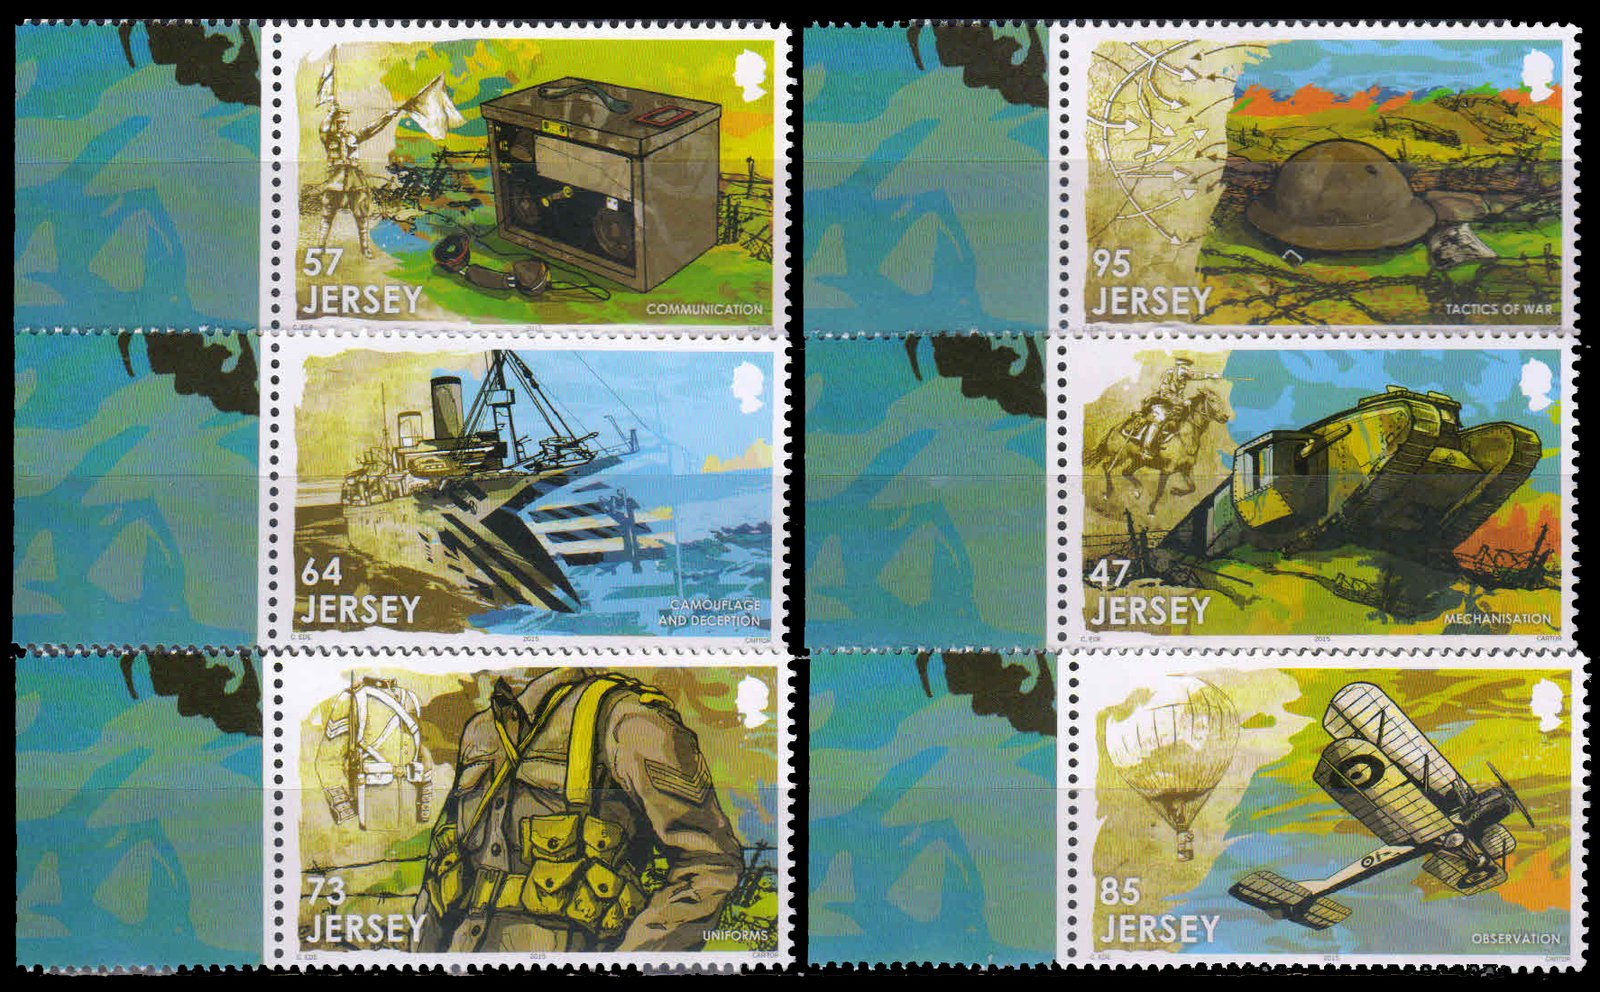 JERSEY 2015-Cent of the Great 1st World War, Military-Aircraft, Ship, Set of 6, MNH, Face £ 4.1-S.G. 1977-1982-Cat £ 11.50